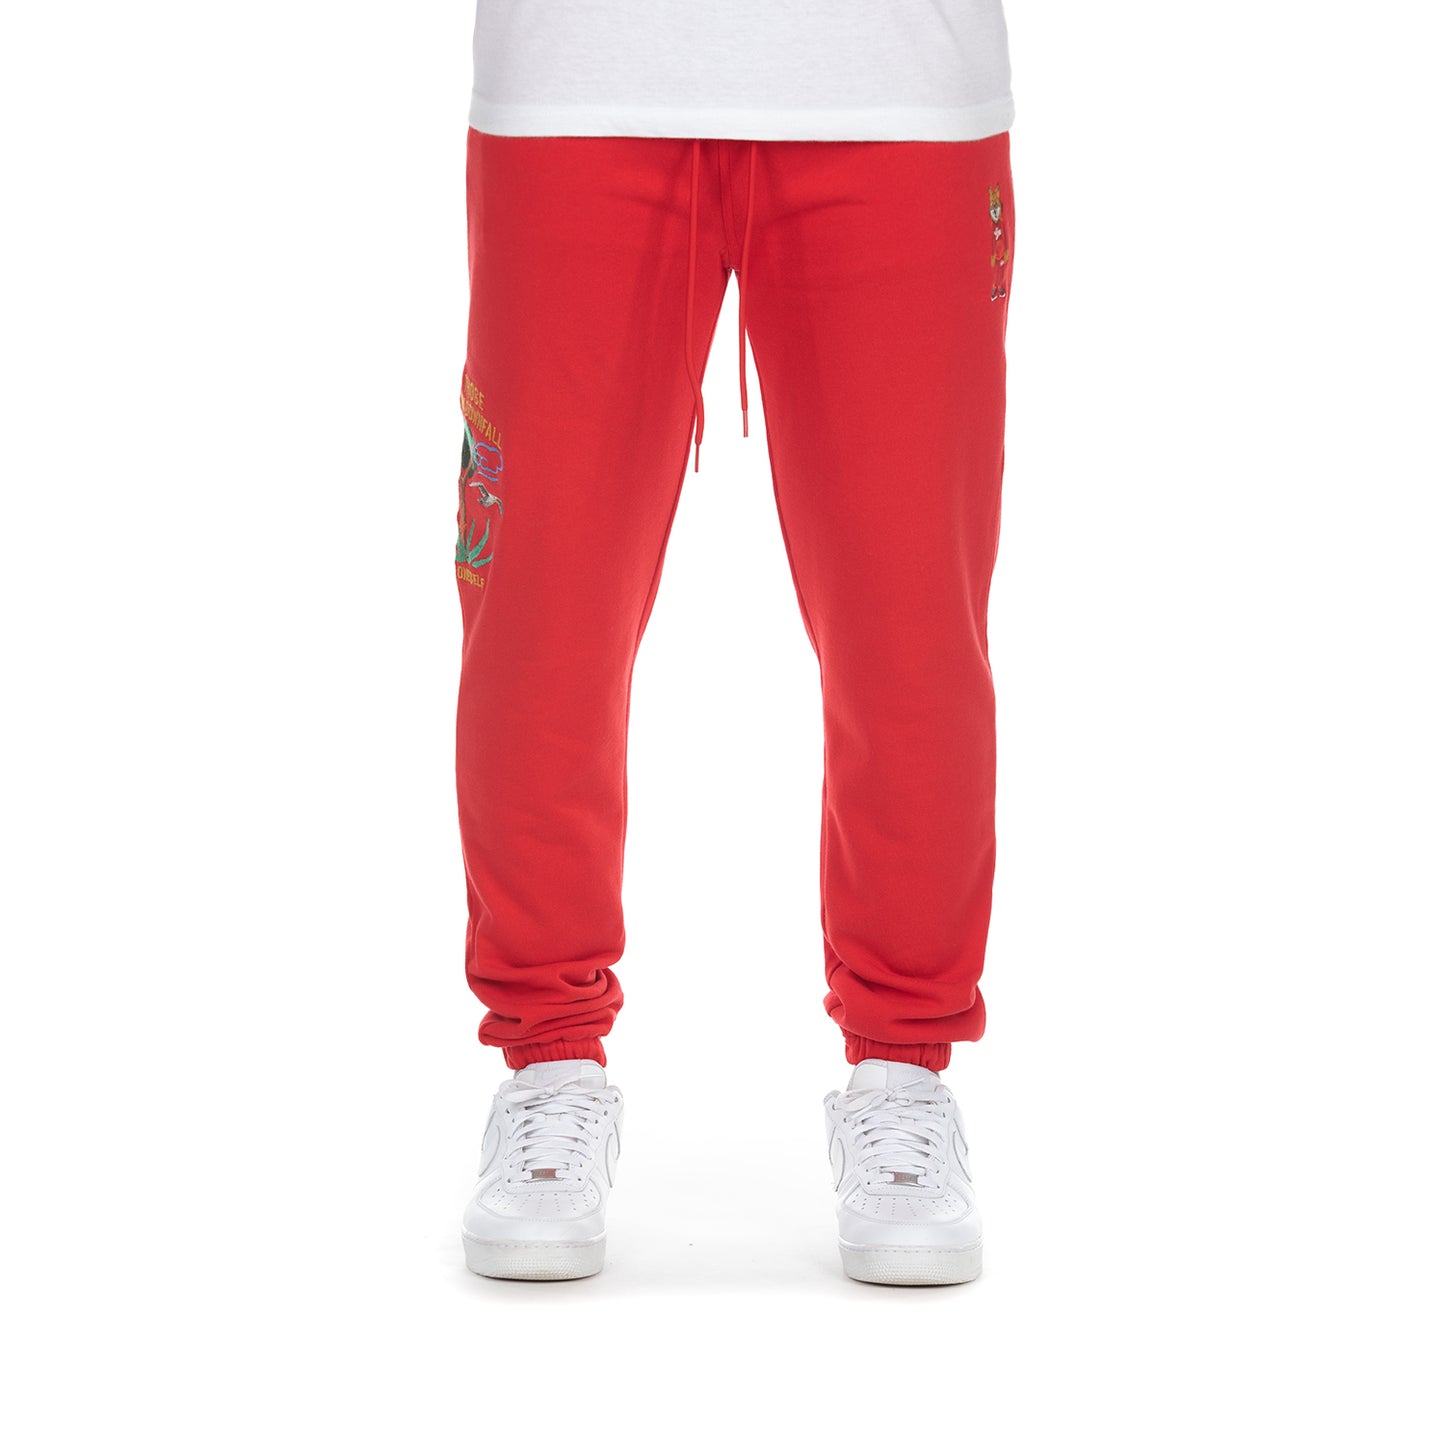 Vibrant Red Slim-Fit Jeans with Artistic Embroidery Detailing - Trendy and Stylish - Steady Red